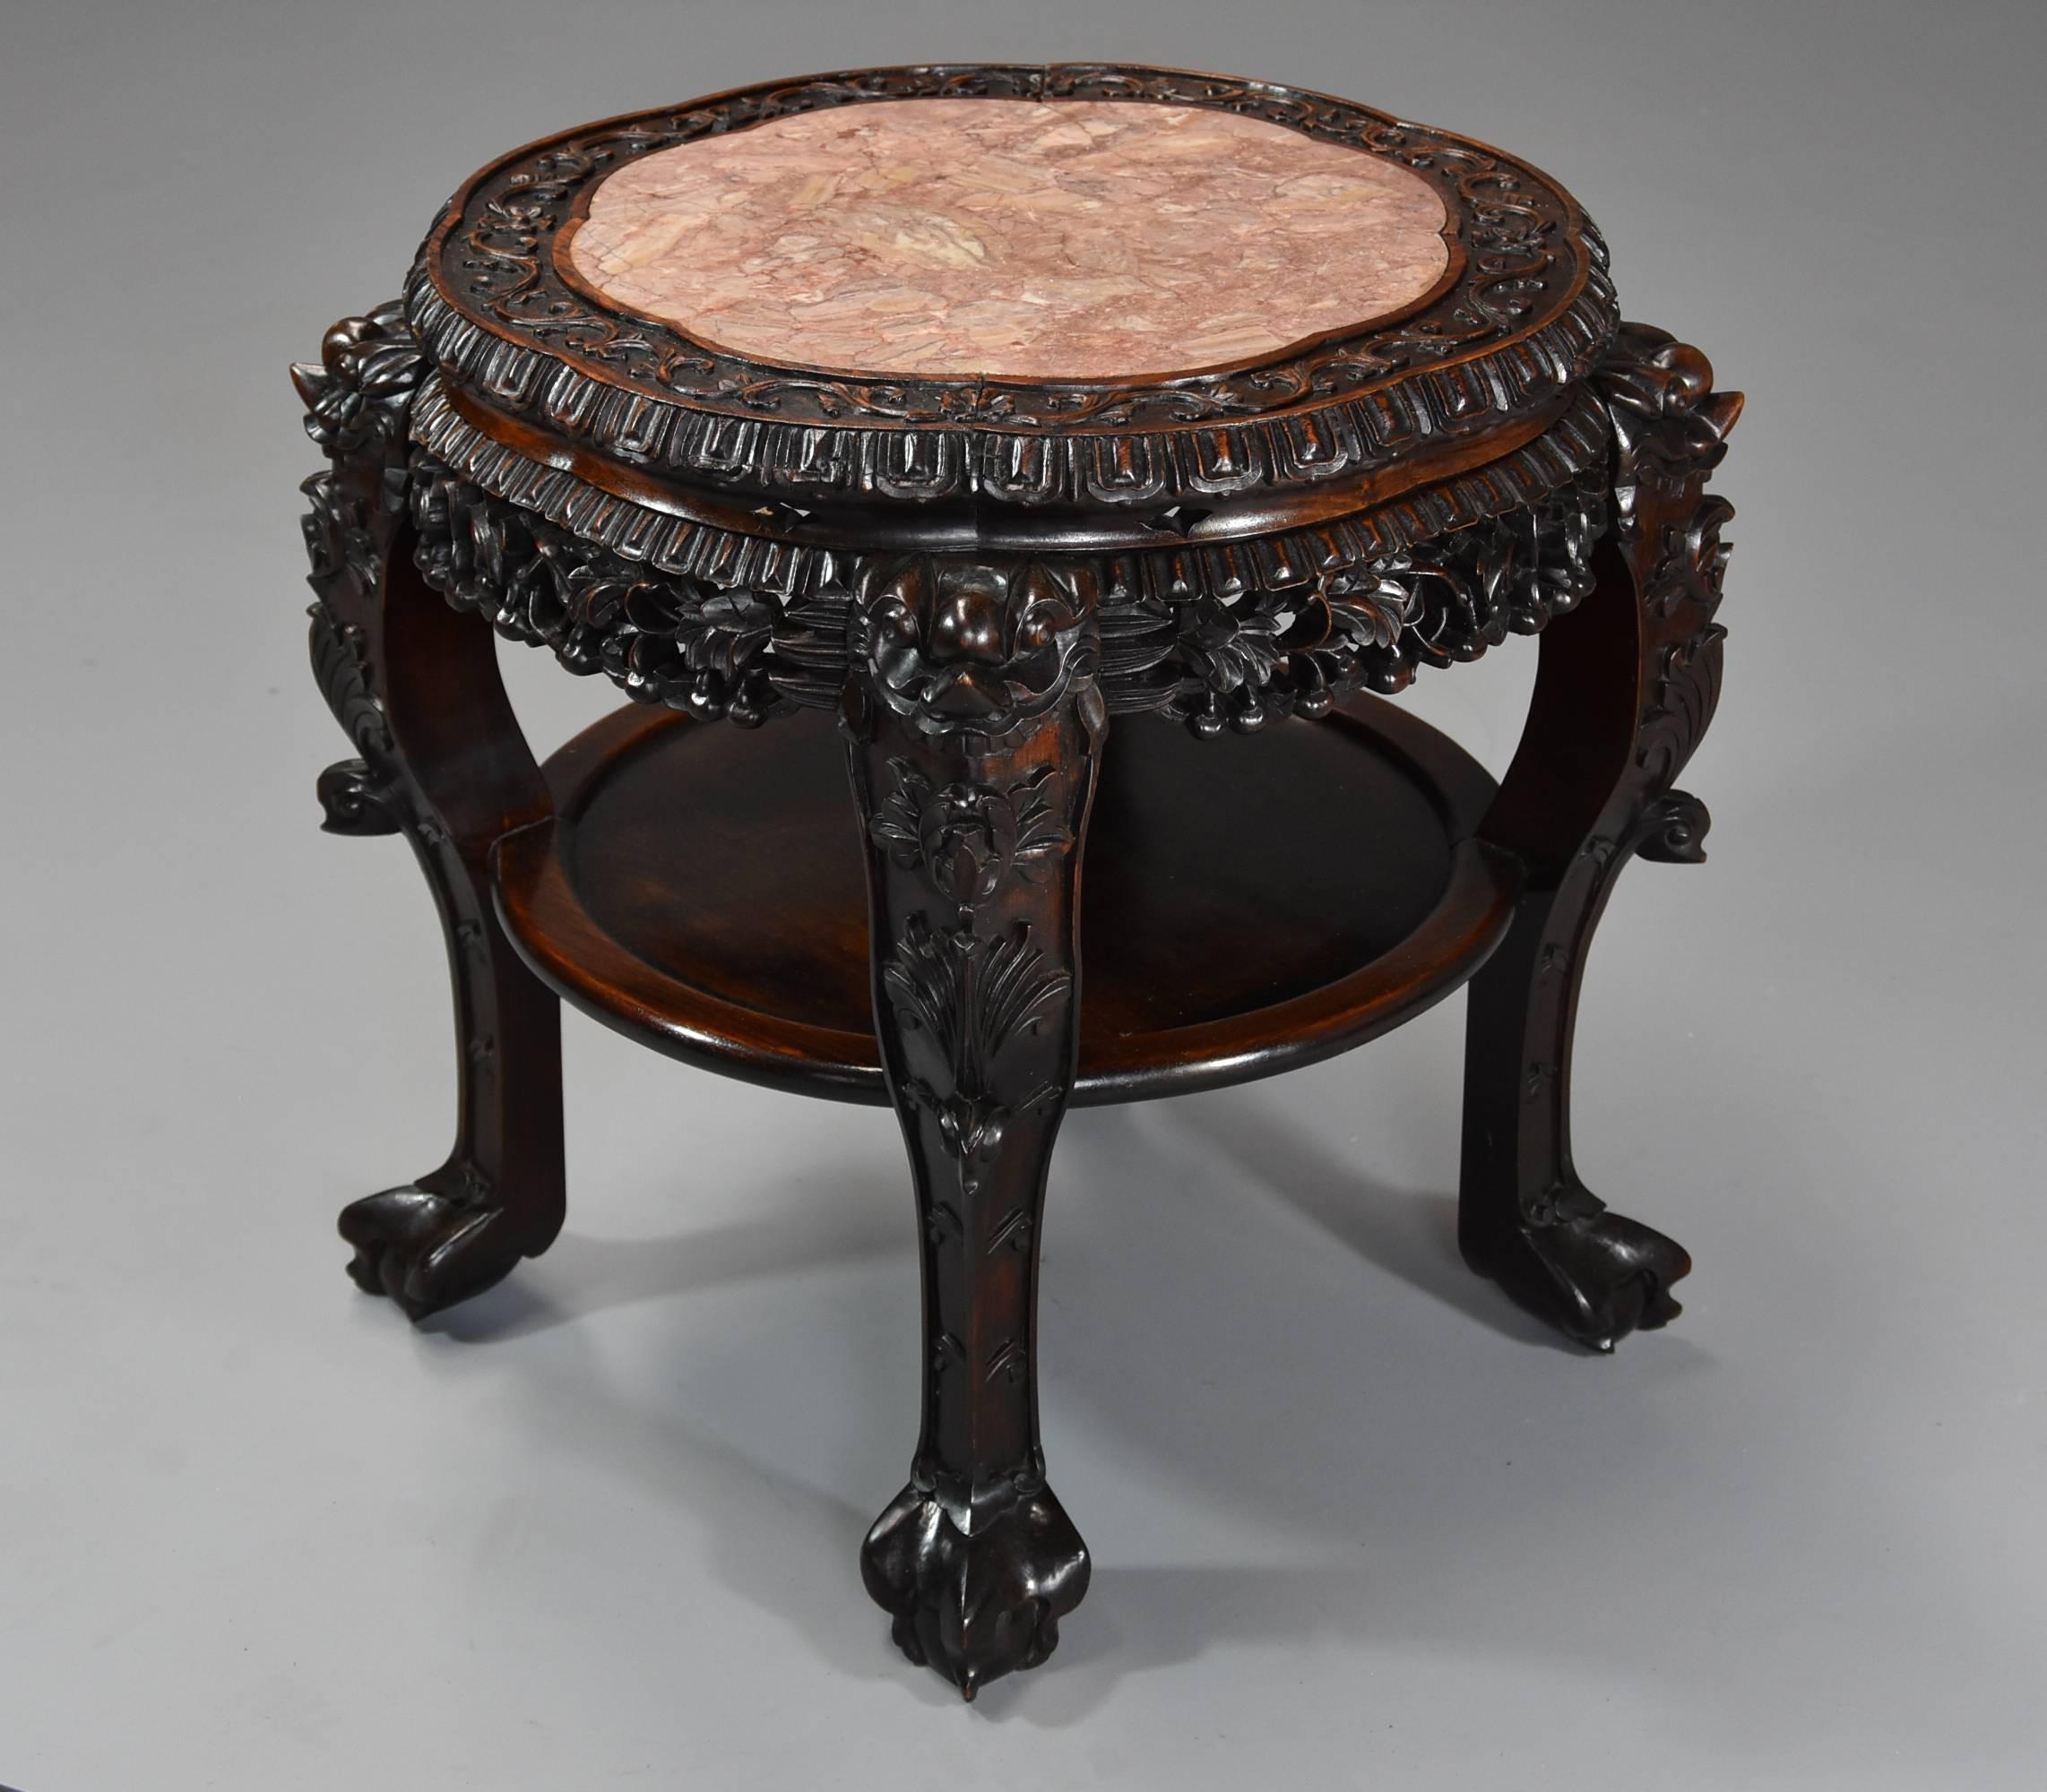 A late 19th century Chinese hardwood circular pot stand or low table with shaped marble inset top. 

This pot stand consists of a shaped Chinese rouge marble top, this being recessed into the top surrounded by foliate and floral carved decoration